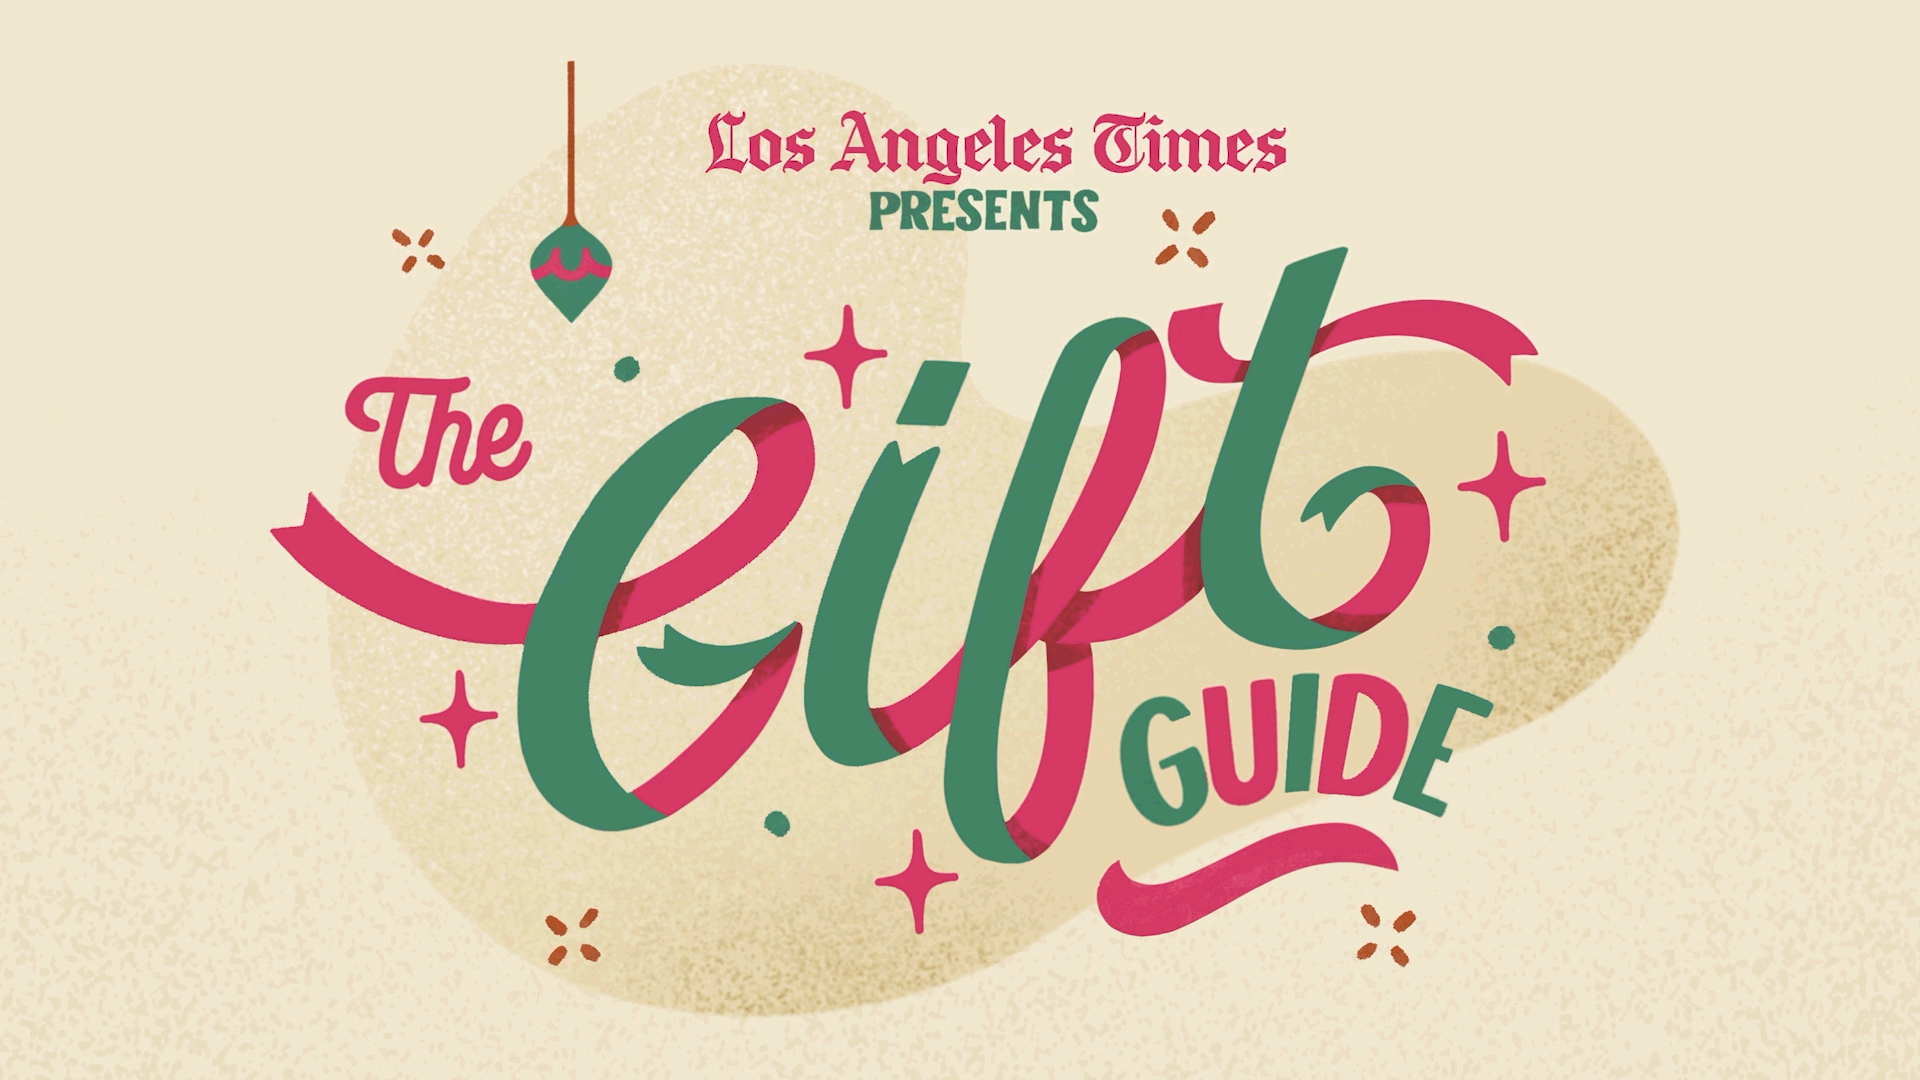 L.A. Times 2021 holiday gift guide - Los Angeles Times